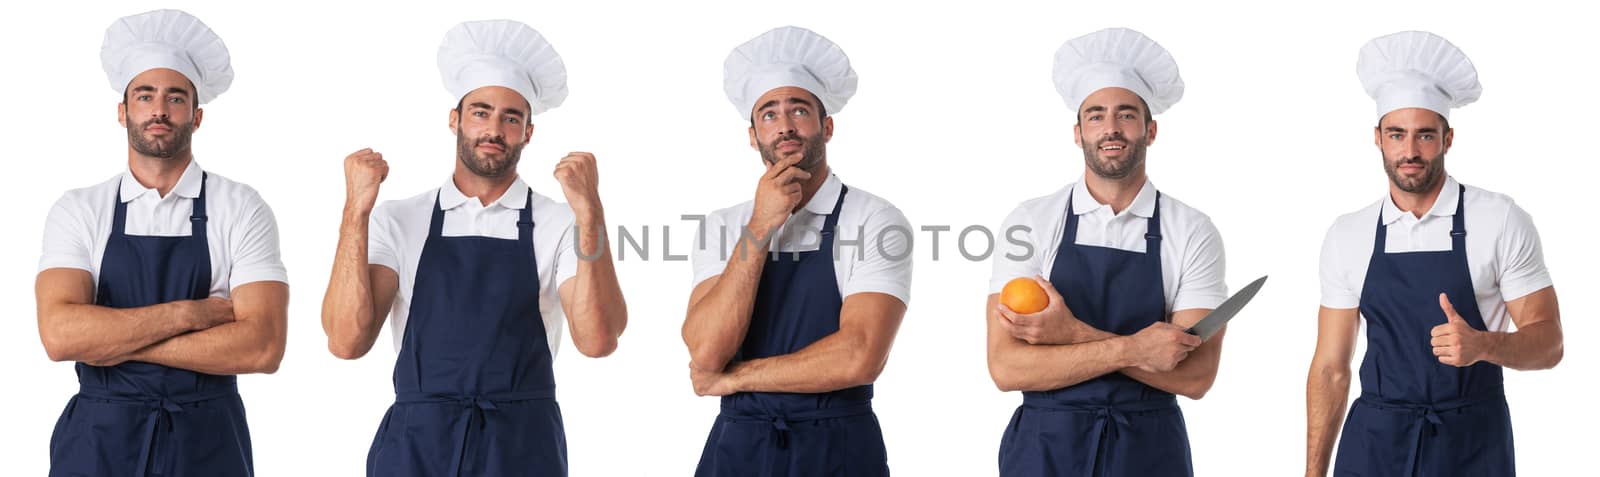 Cook or chef man set isolated on white background design elements collection